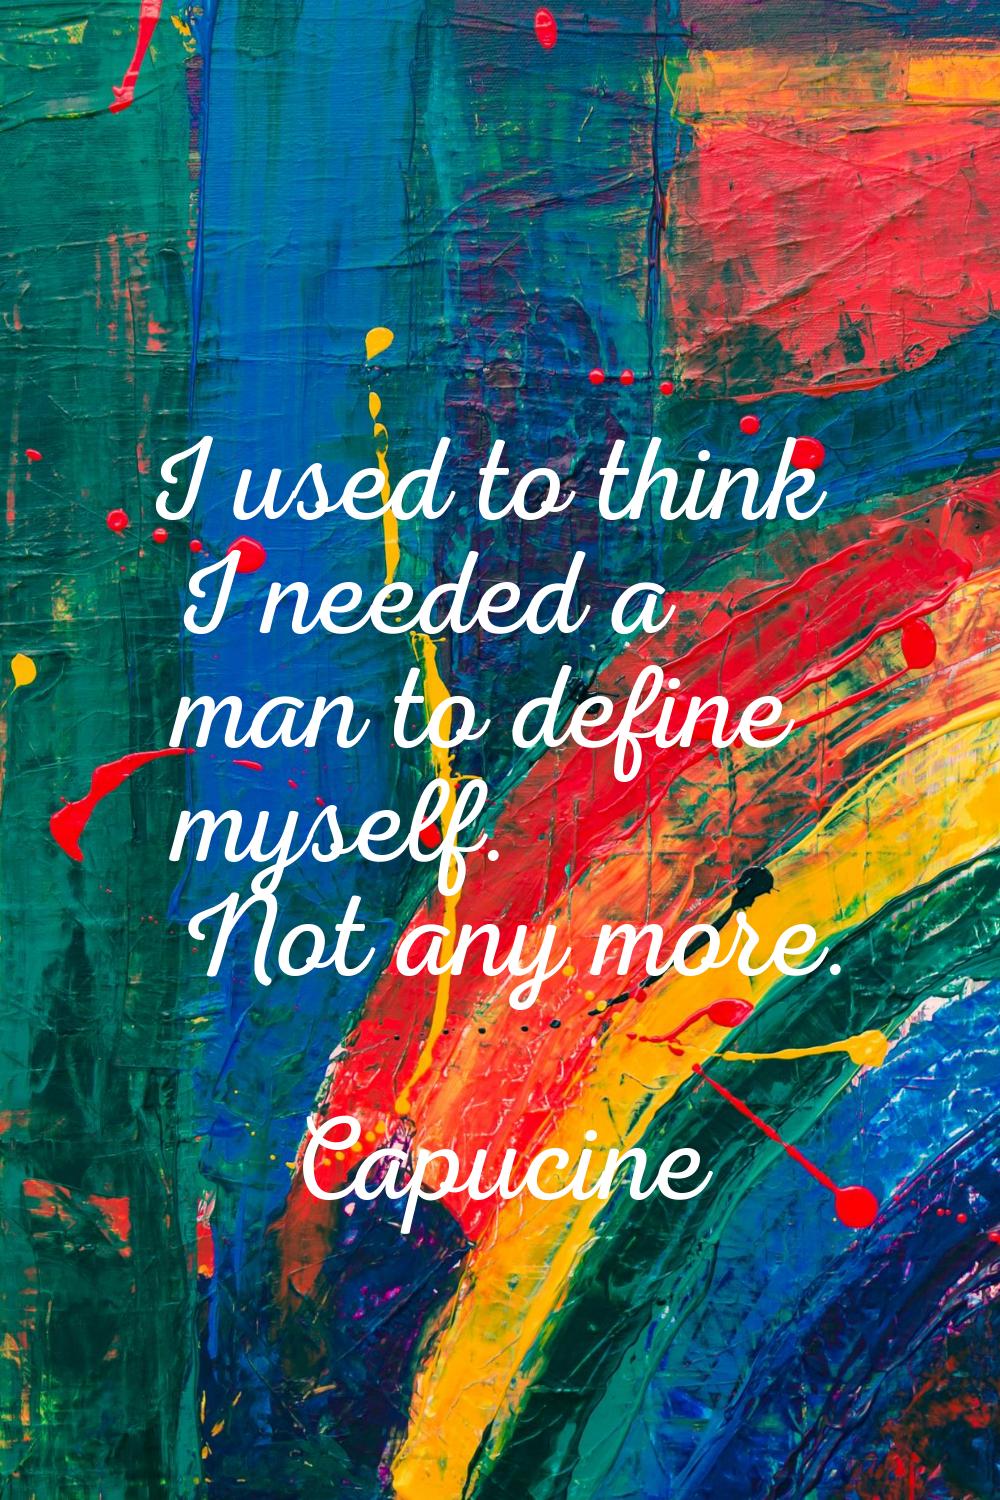 I used to think I needed a man to define myself. Not any more.